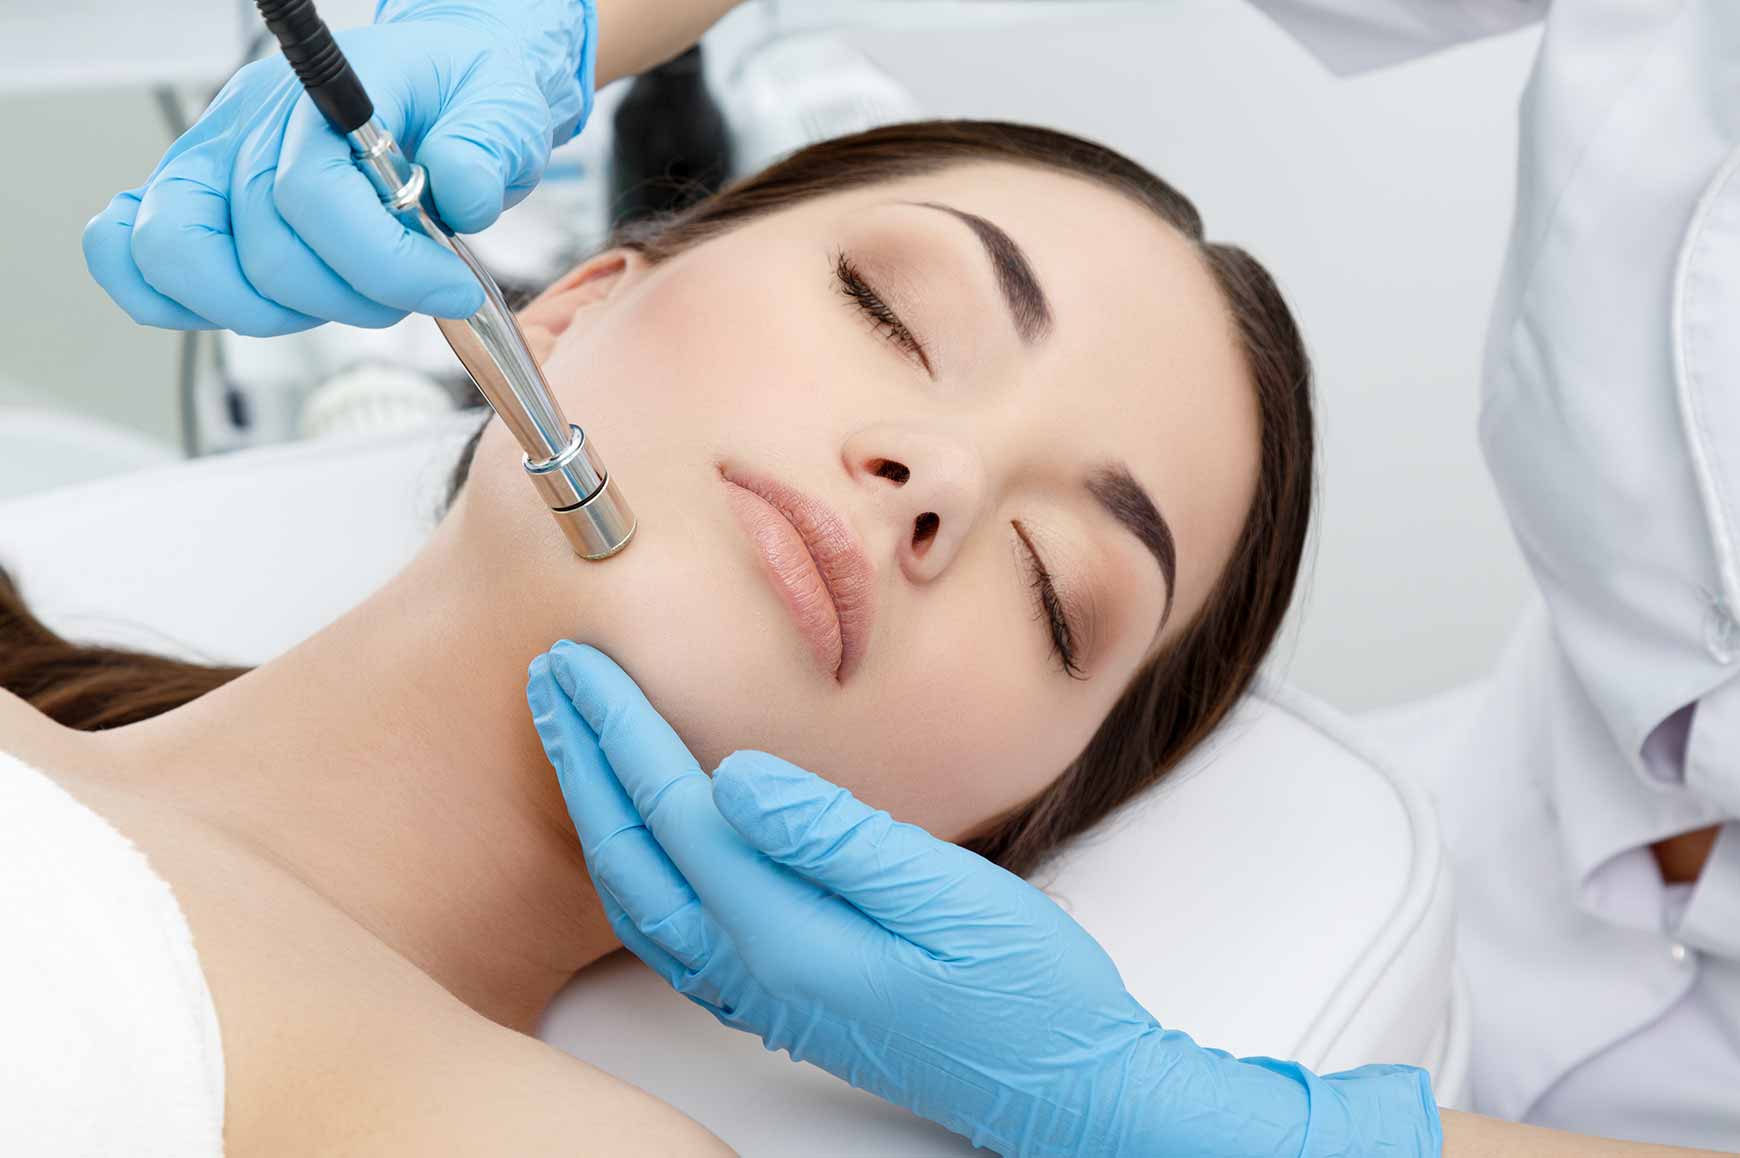 Microdermabrasion treatment helps to exfoliate the surface layers of skin on your face.